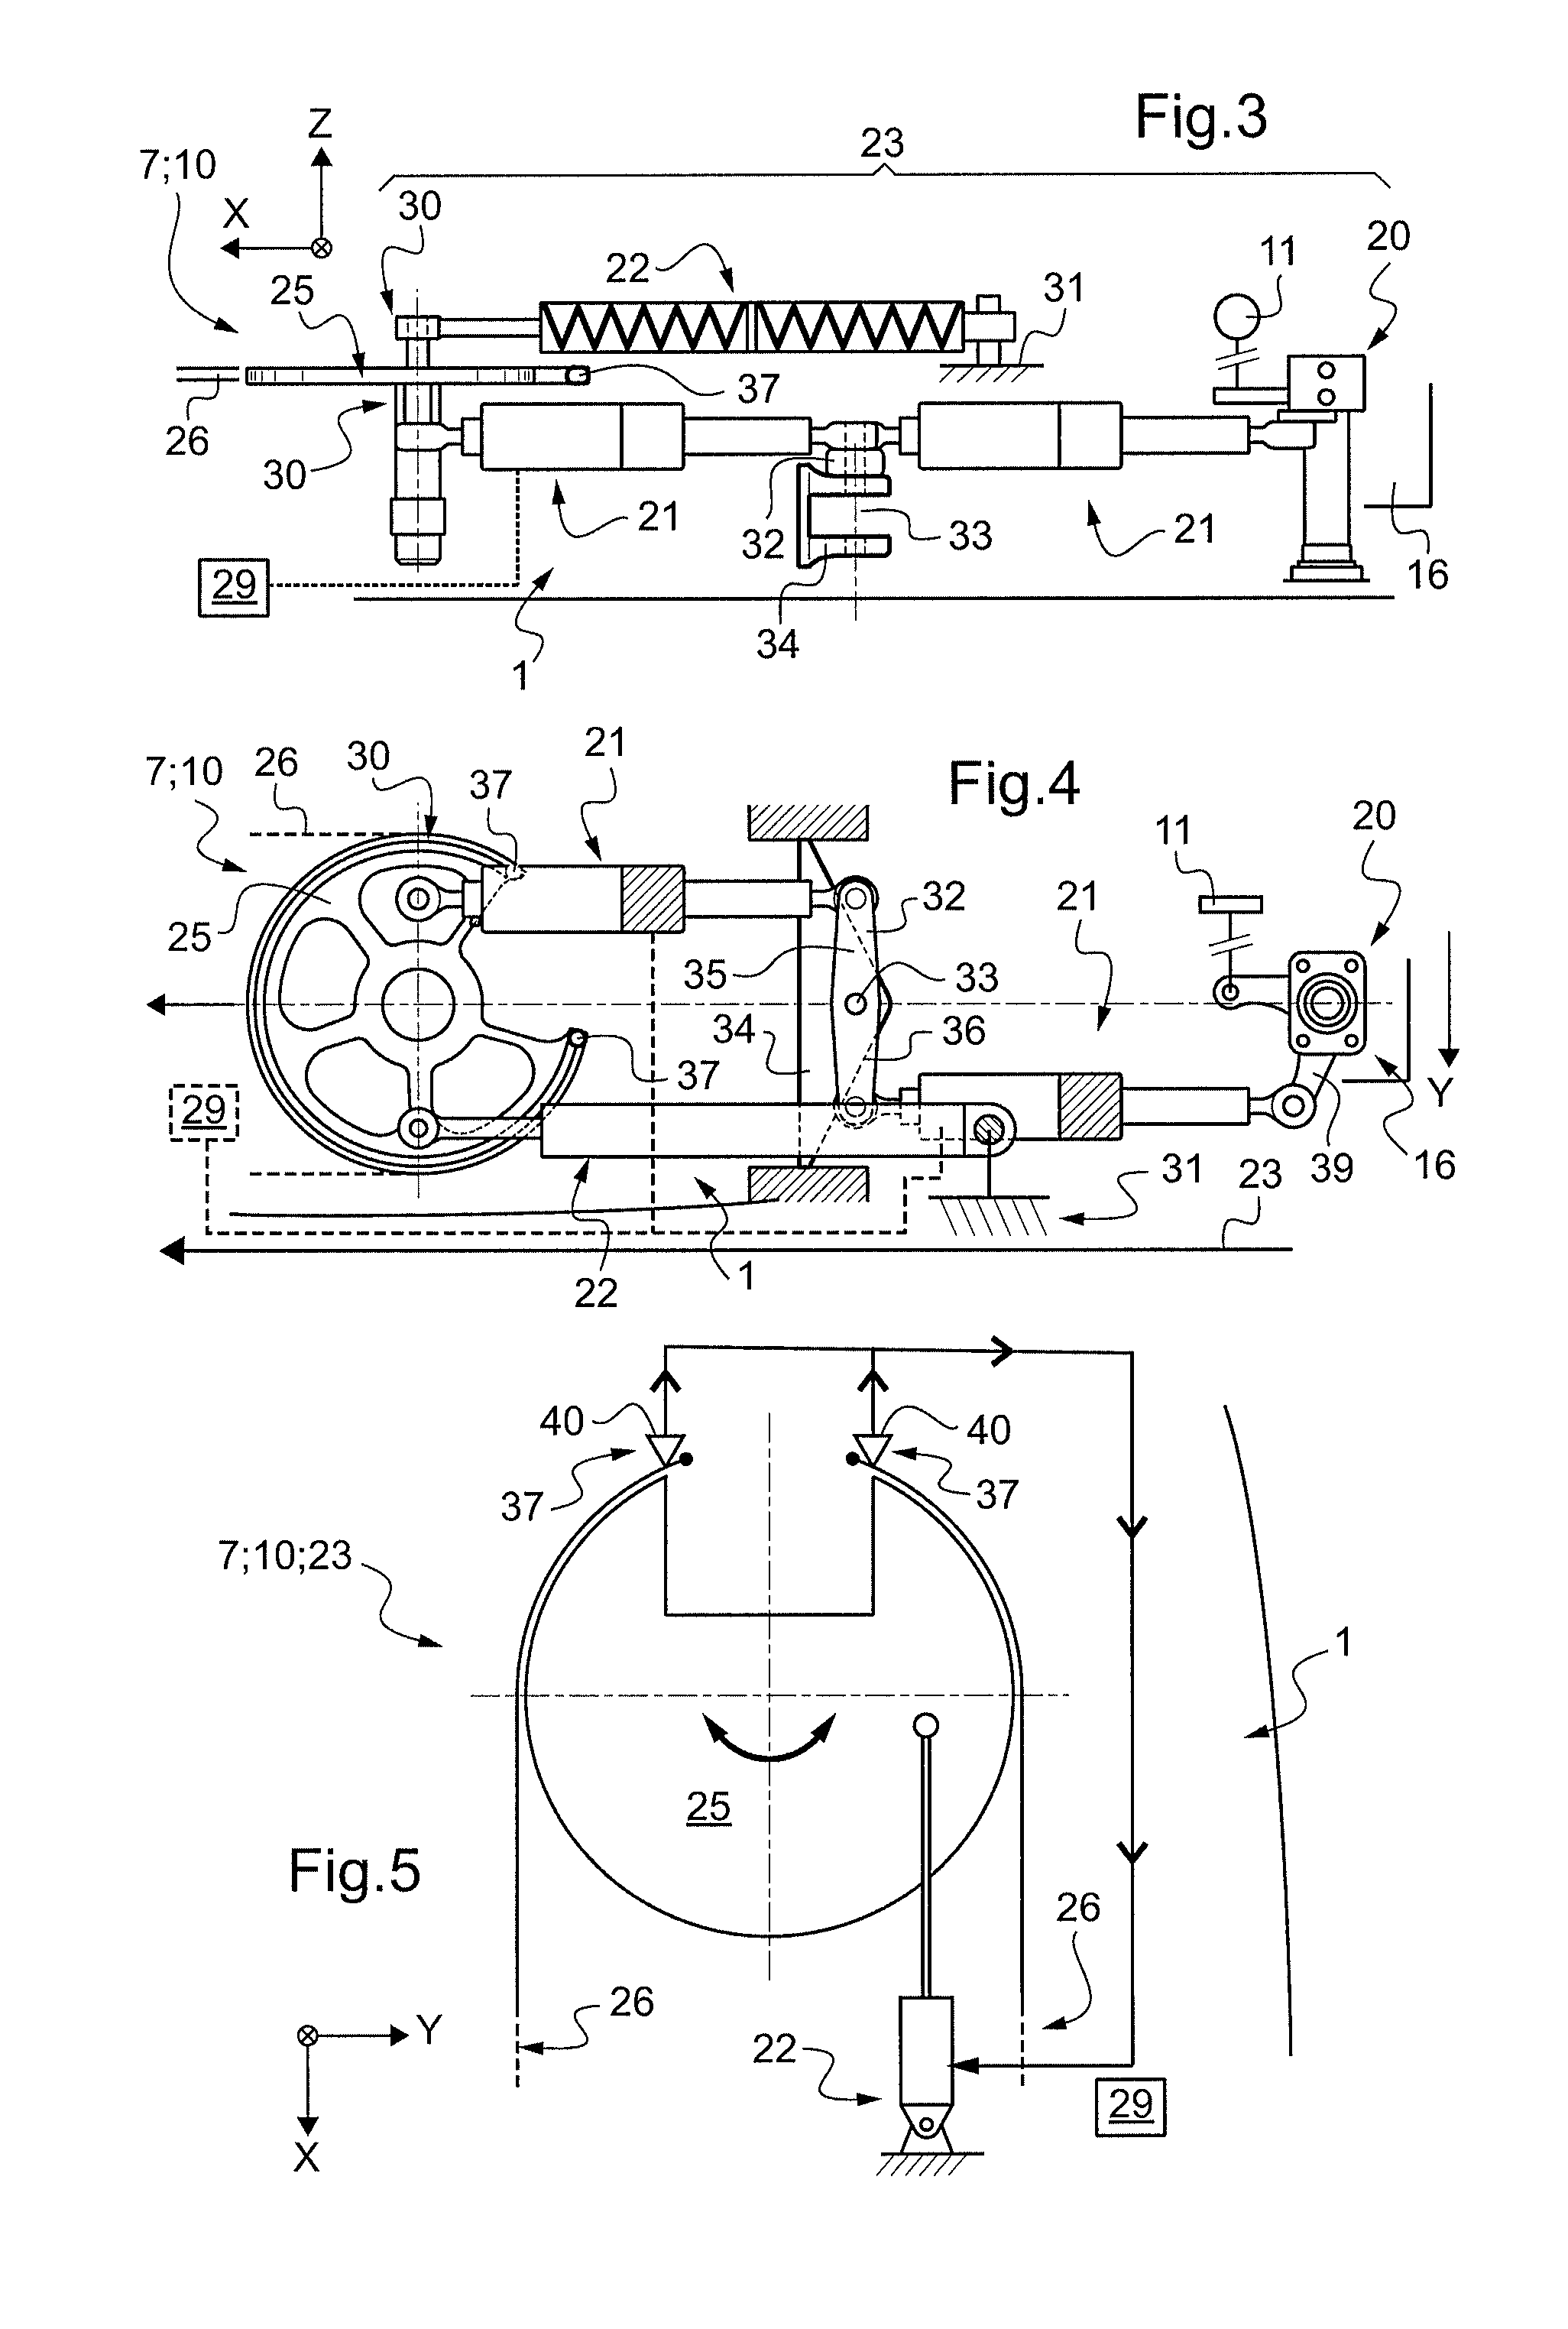 Emergency piloting by means of a series actuator for a manual flight control system in an aircraft